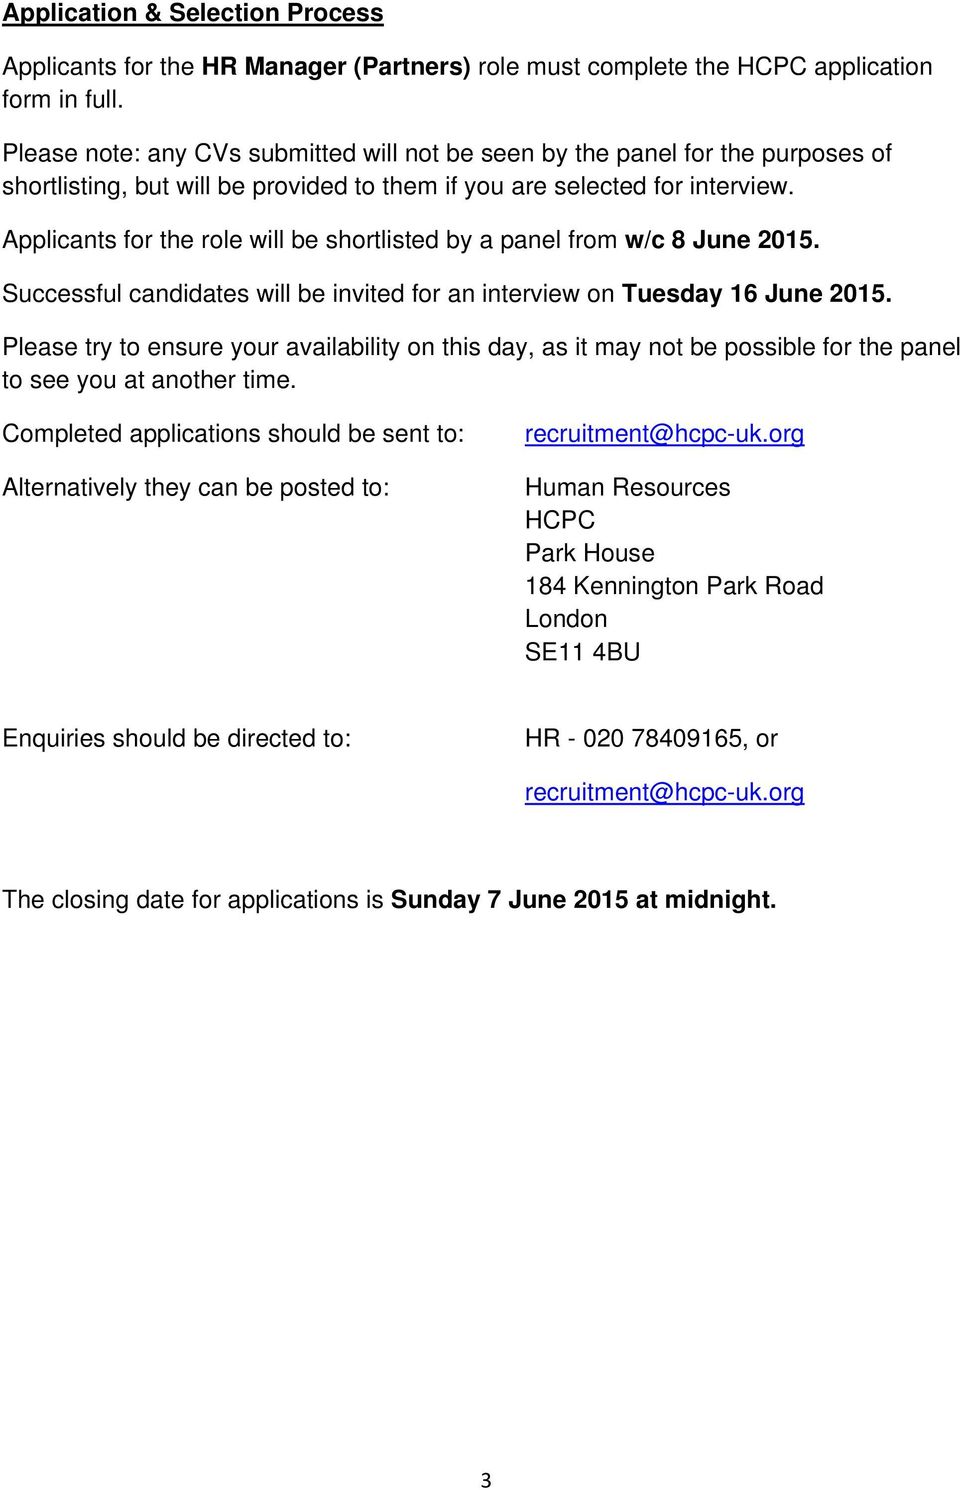 Applicants for the role will be shortlisted by a panel from w/c 8 June 2015. Successful candidates will be invited for an interview on Tuesday 16 June 2015.